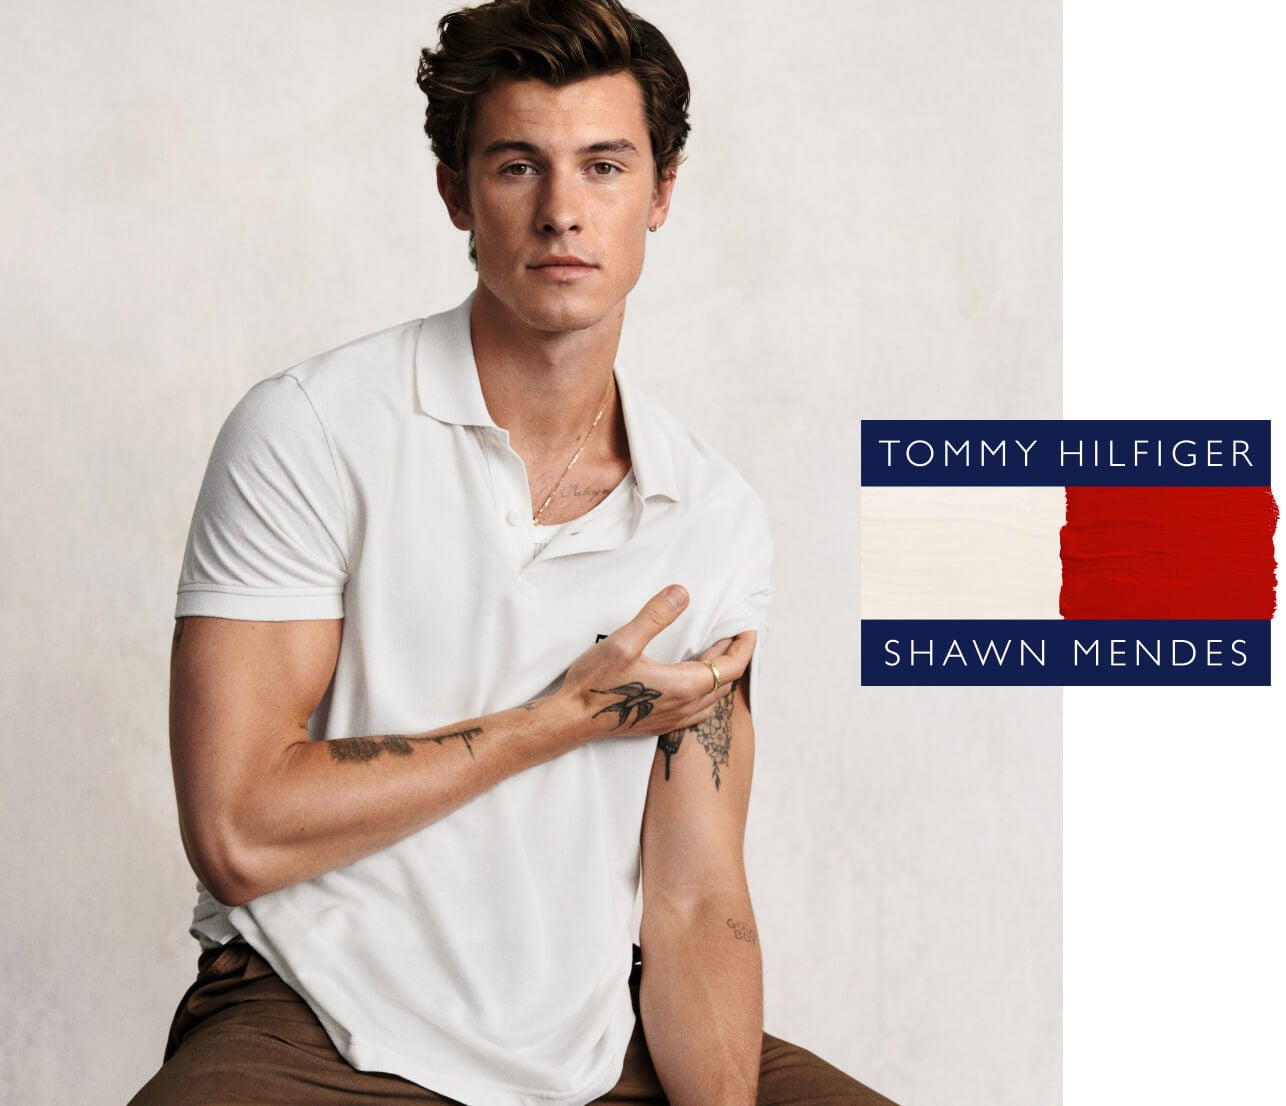 TOMMYxSHAWNMENDES | Tommy Hilfiger USA